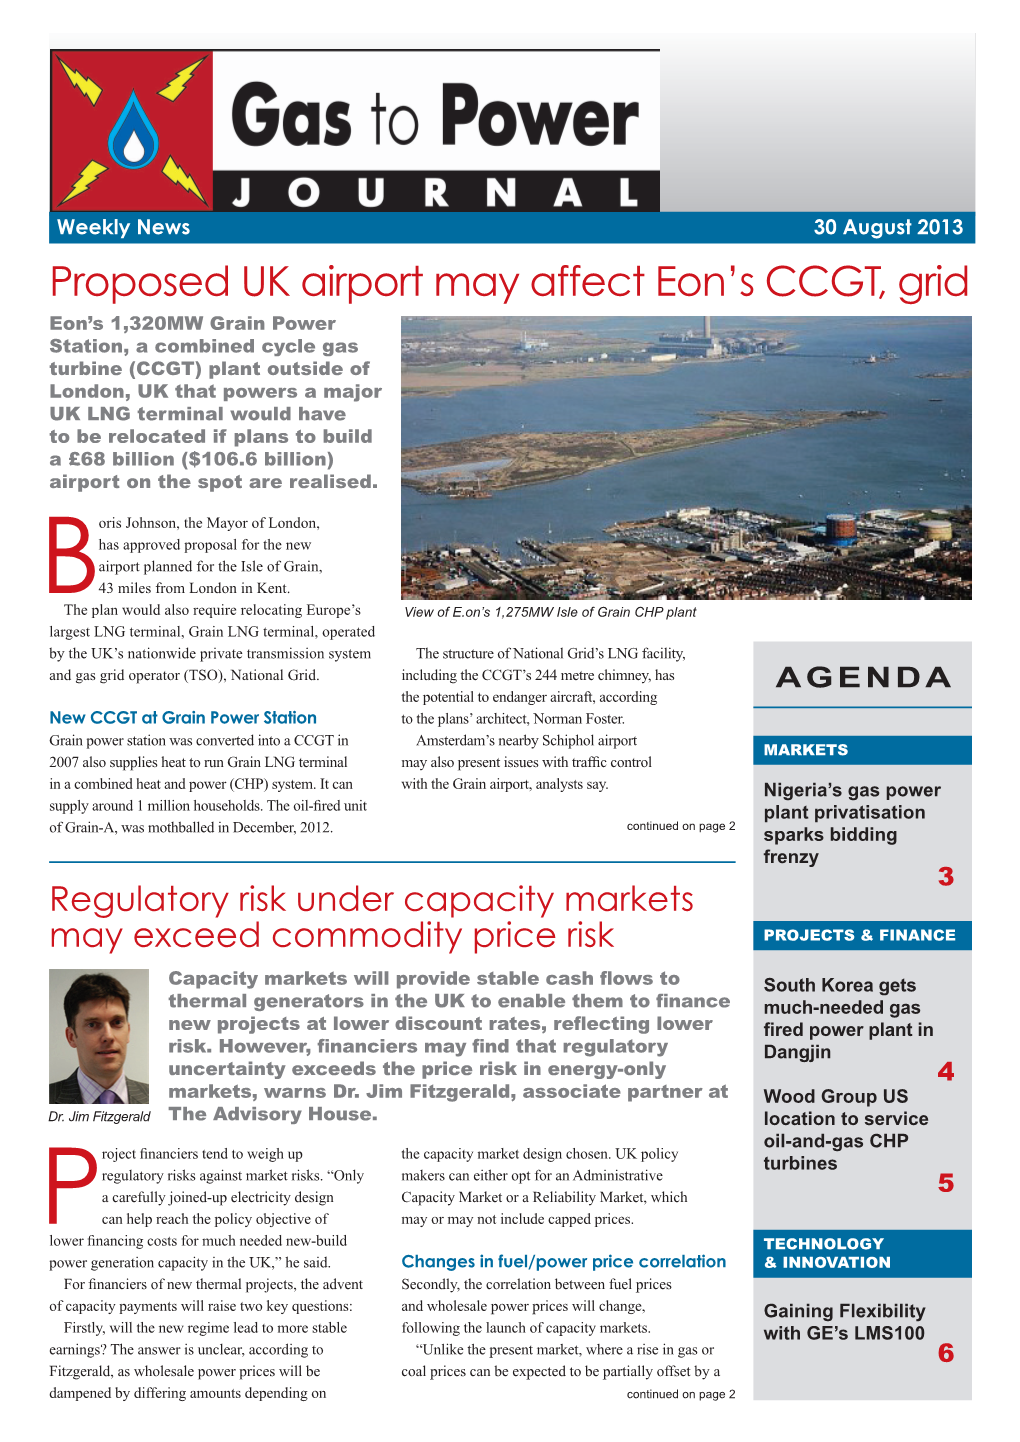 Proposed UK Airport May Affect Eon's CCGT, Grid